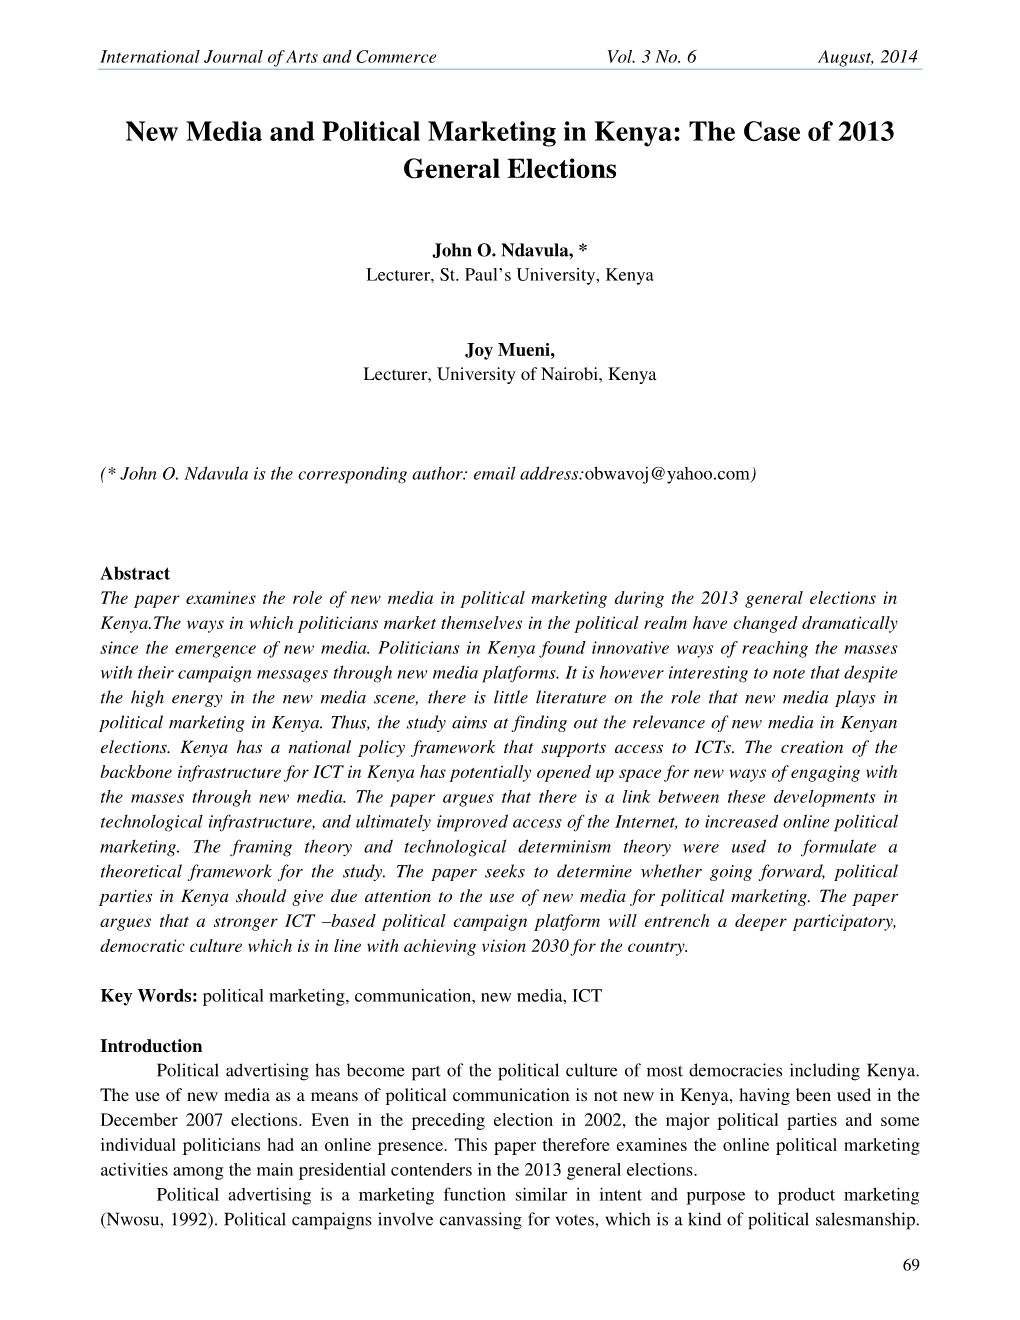 New Media and Political Marketing in Kenya: the Case of 2013 General Elections